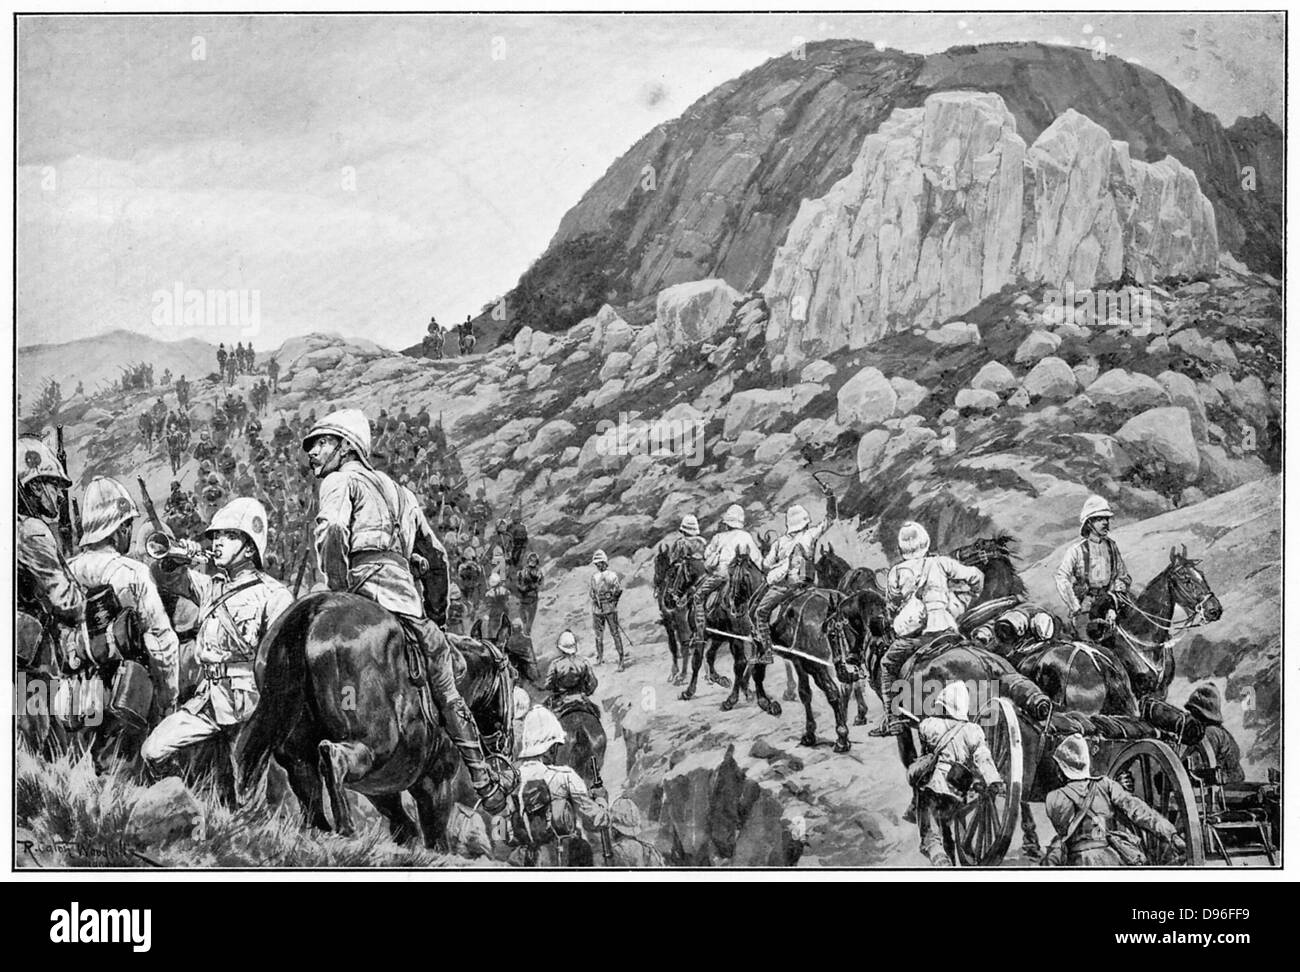 British troops going to the attack on Spion Kop, 24 January. After drawing by R. Caton Woodville. 2nd Boer War 1899-1902. Stock Photo